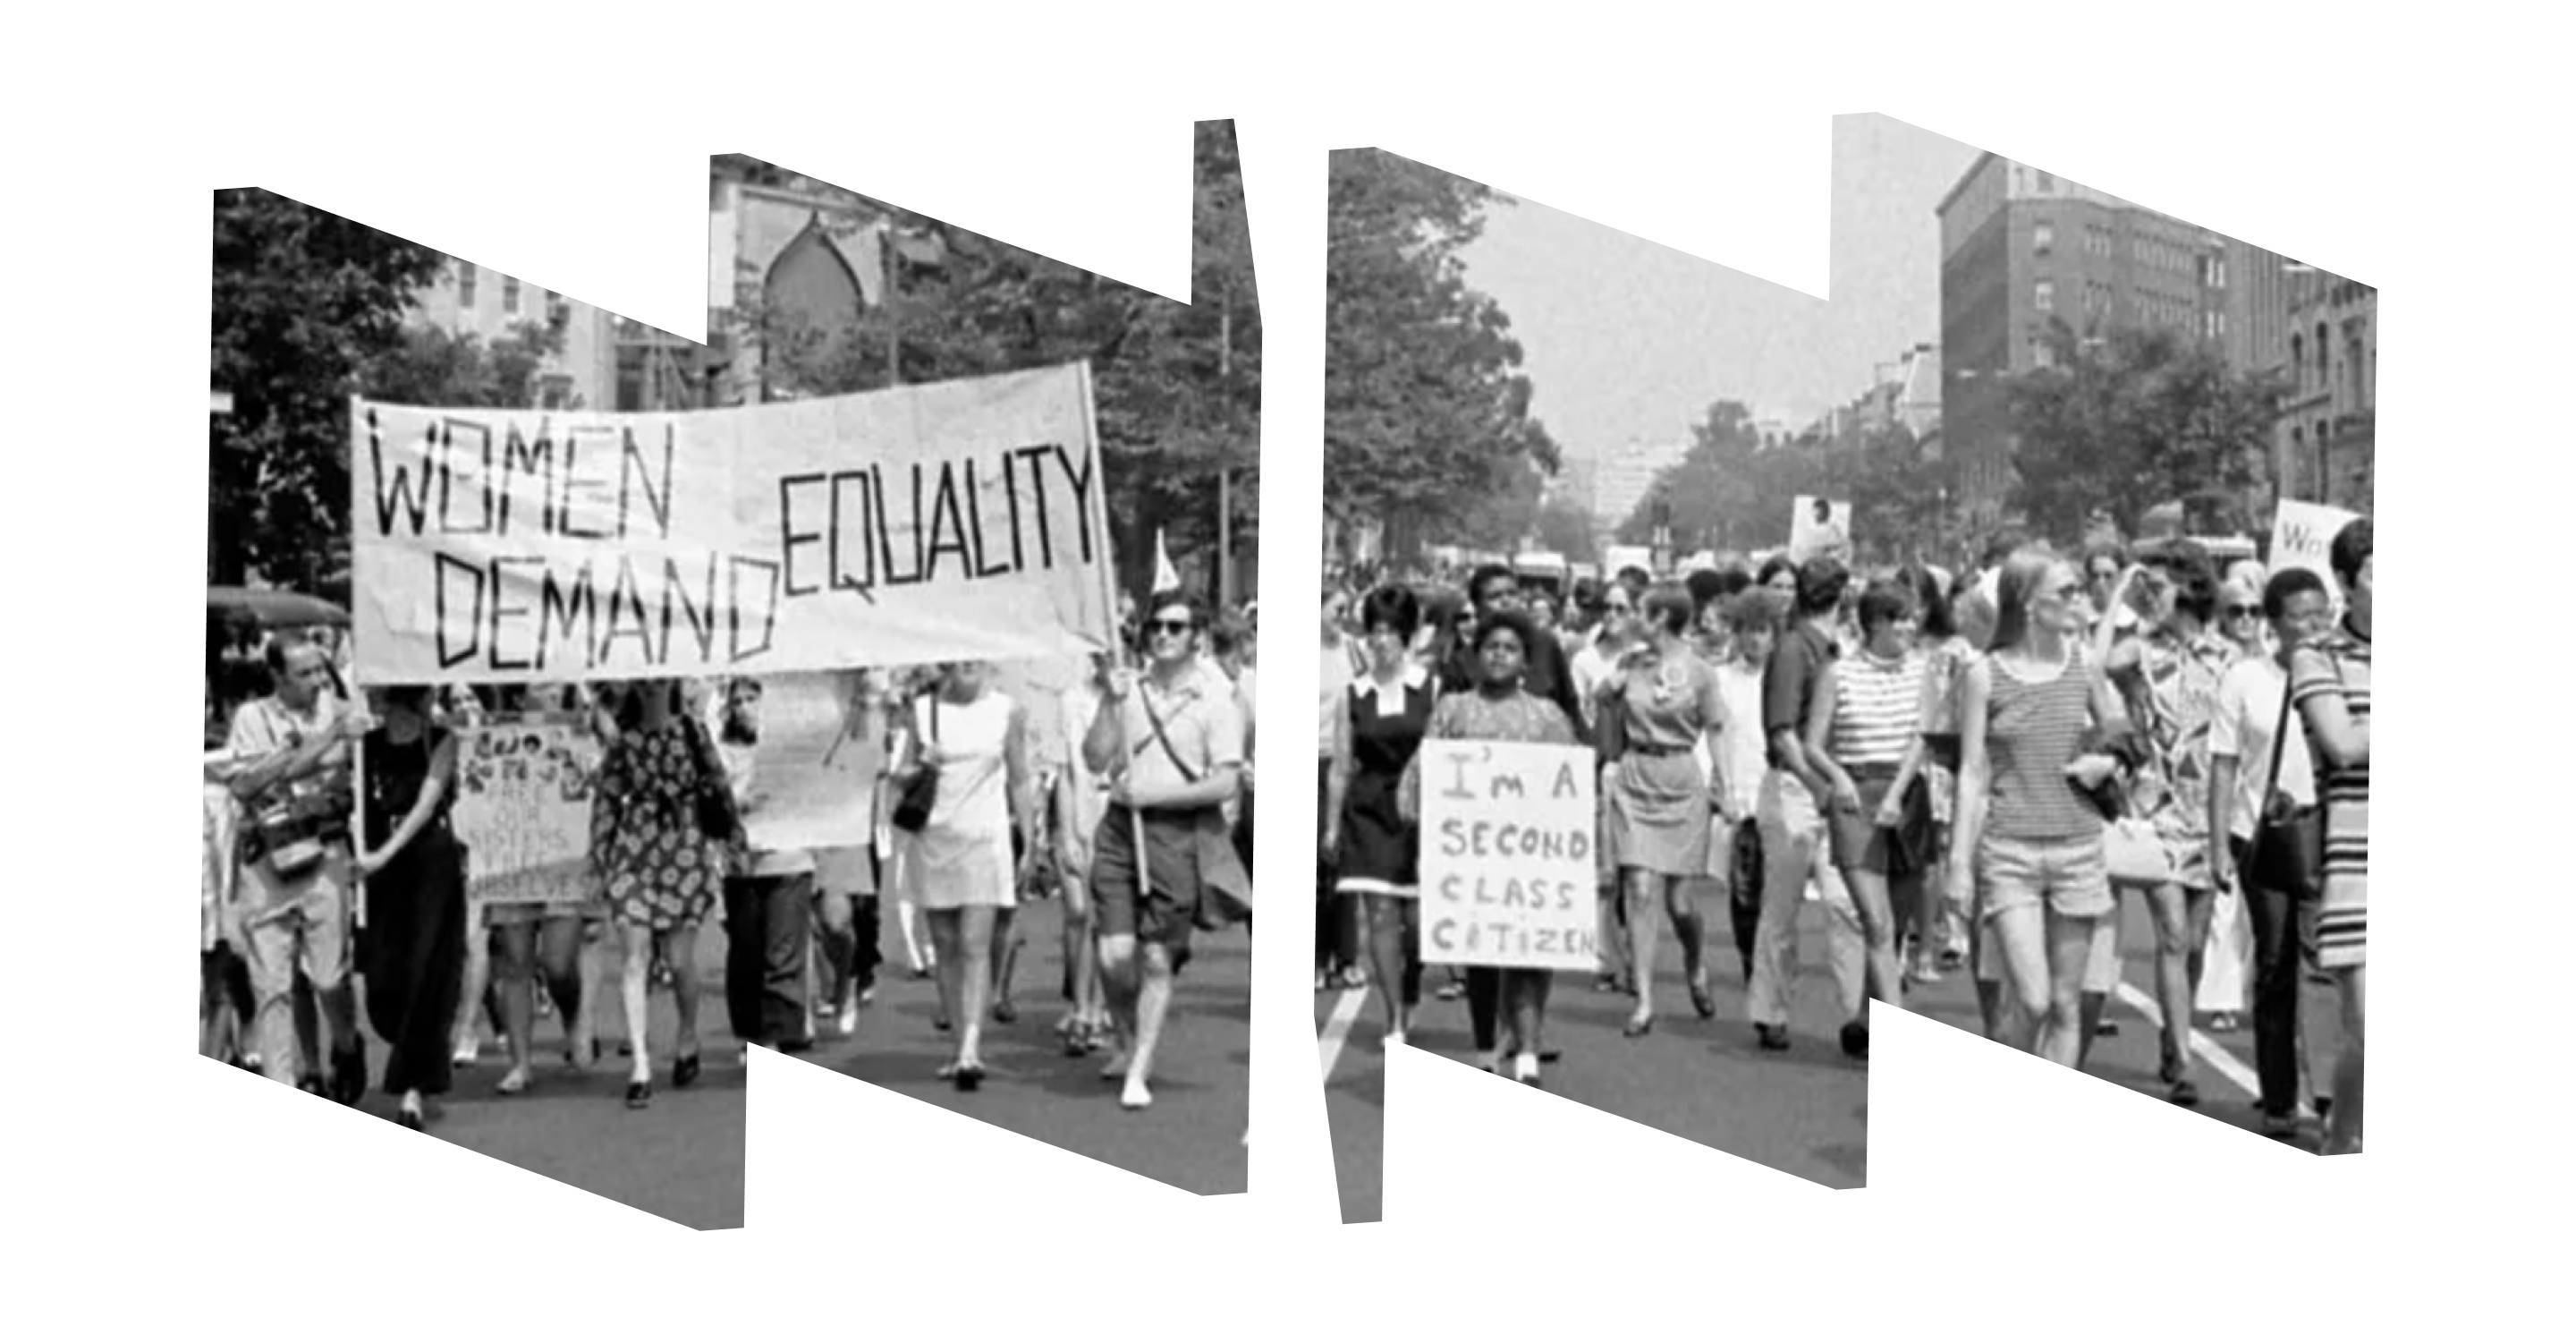 Black and white image of women's liberation march in Washington, DC from Farrugut Square to Layfette Park, 1970. Image sits inside and spans a W and M frame.  Left image has women holding sign that says "Women Demand Equality."  Right image has woman holding sign that says "I'm a second class citizen."